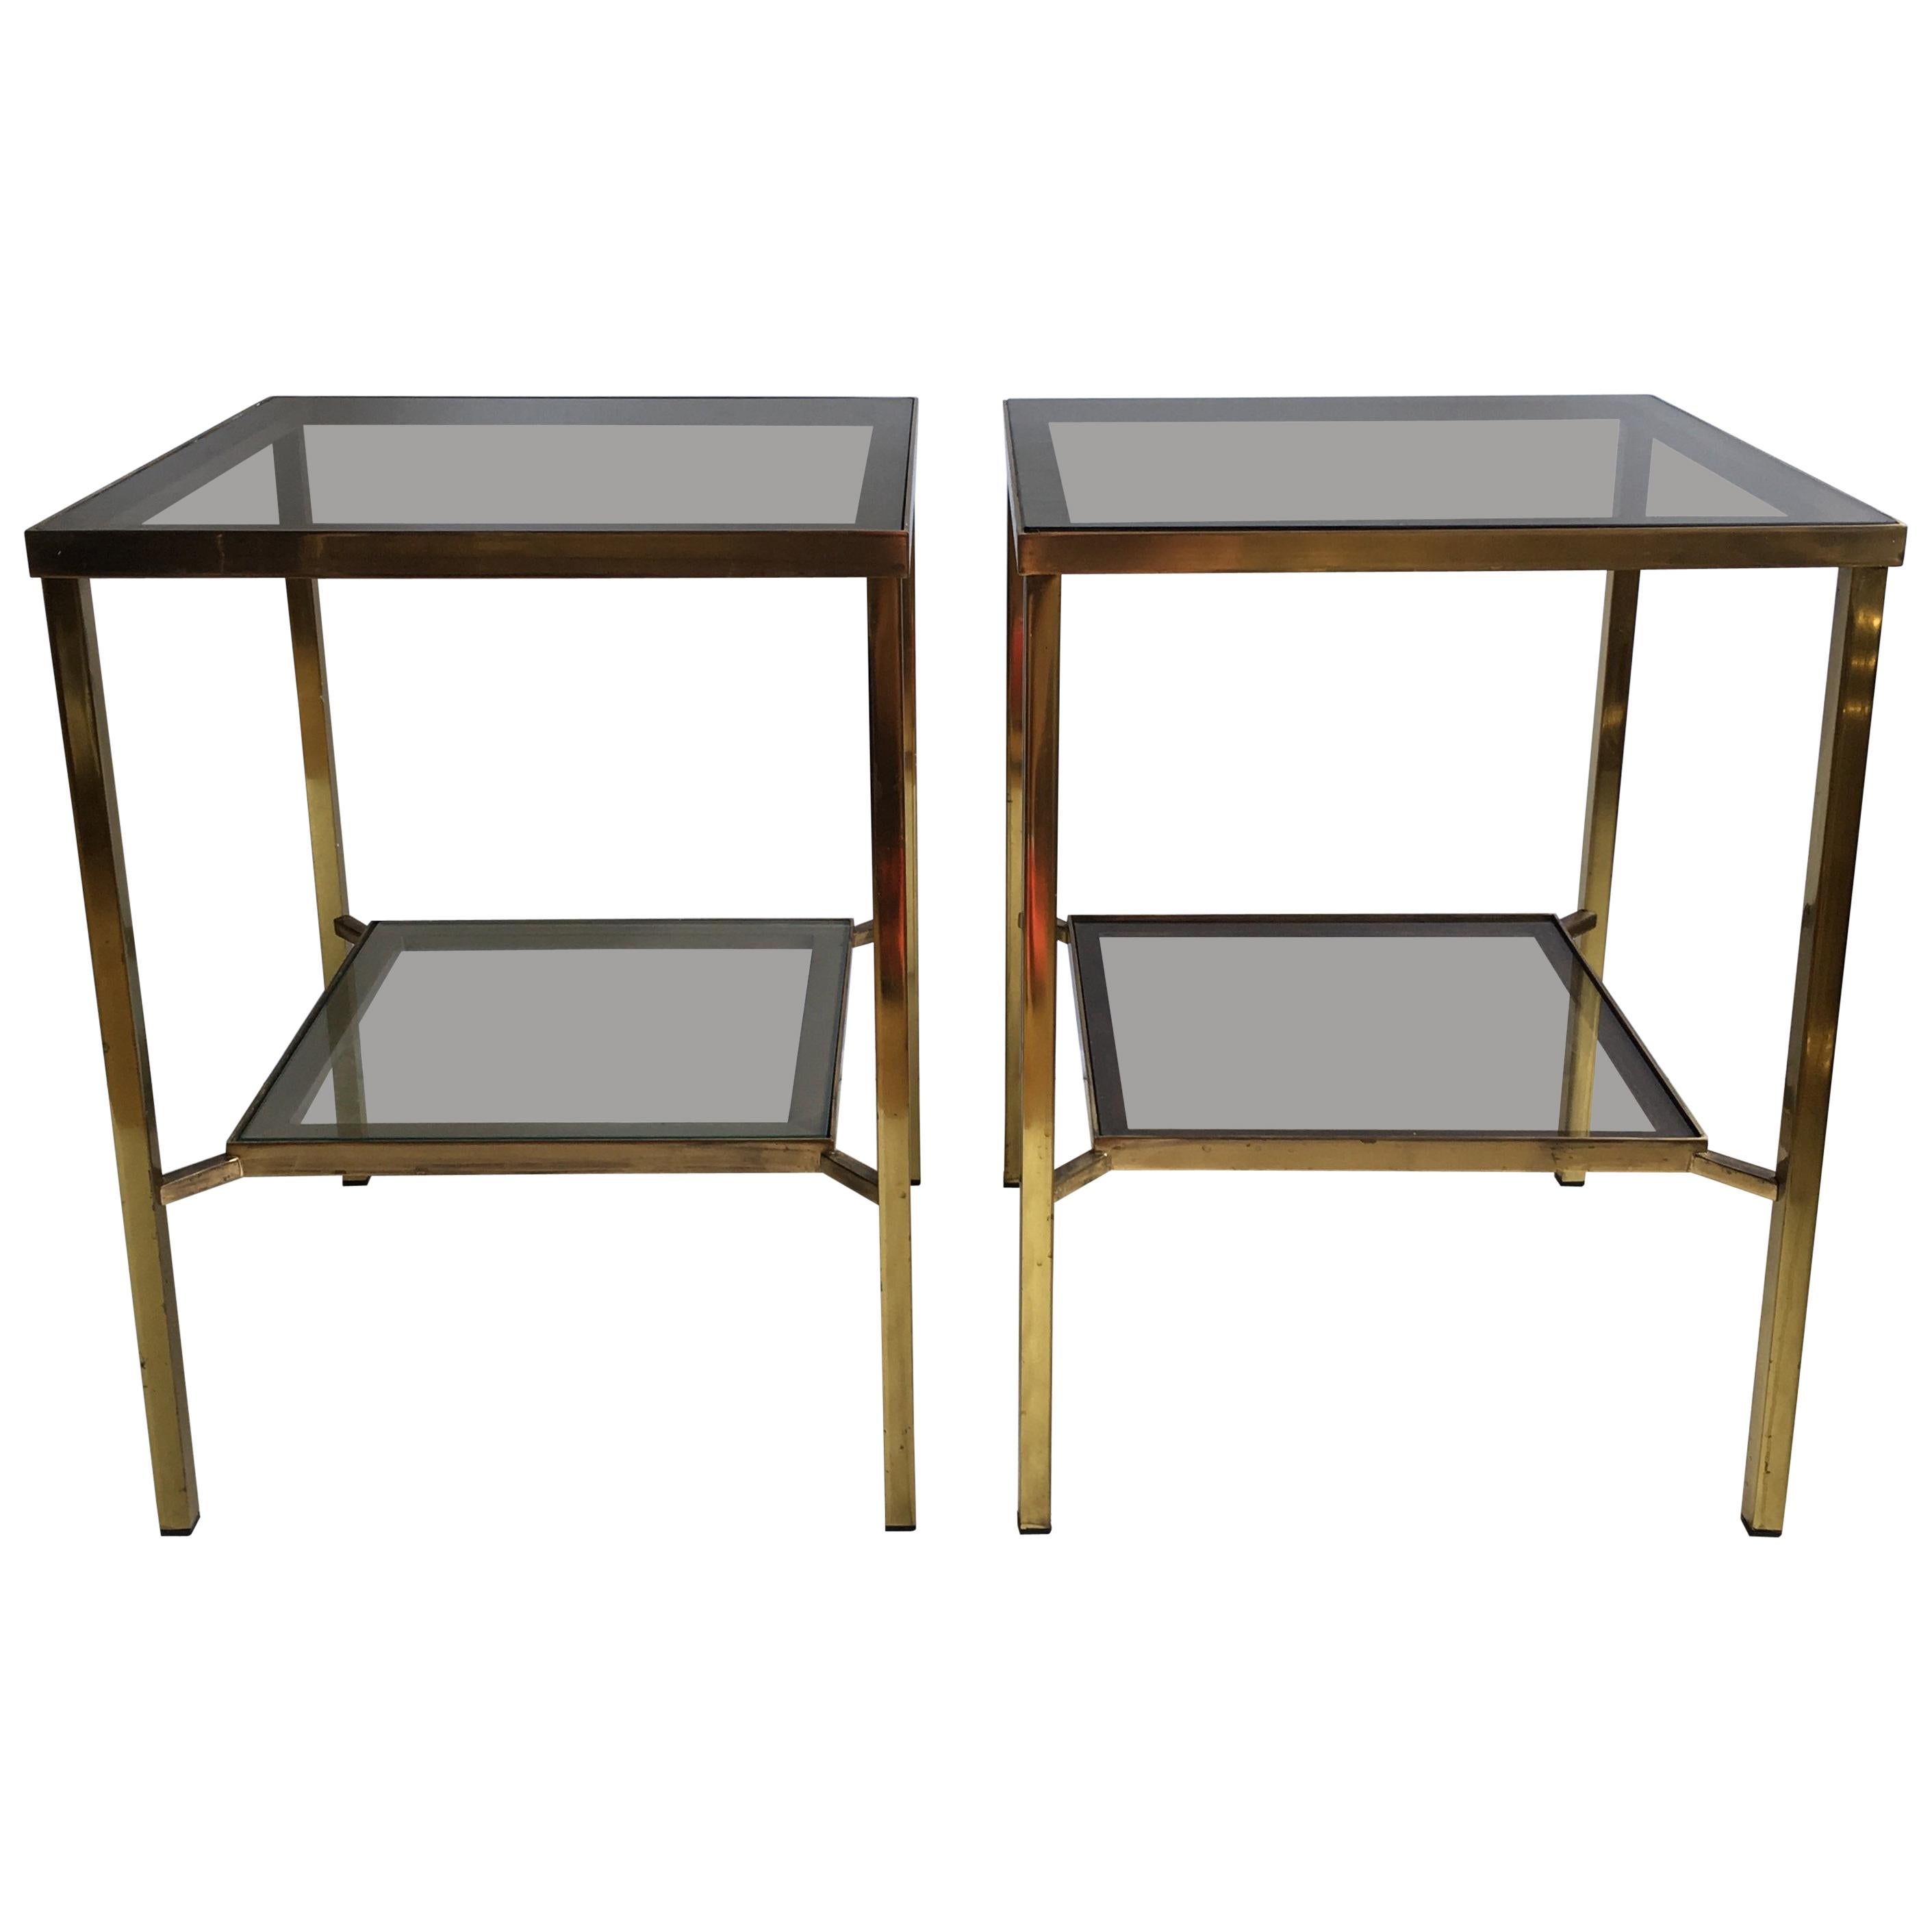 Pair of Tall Vintage Brass Side Tables